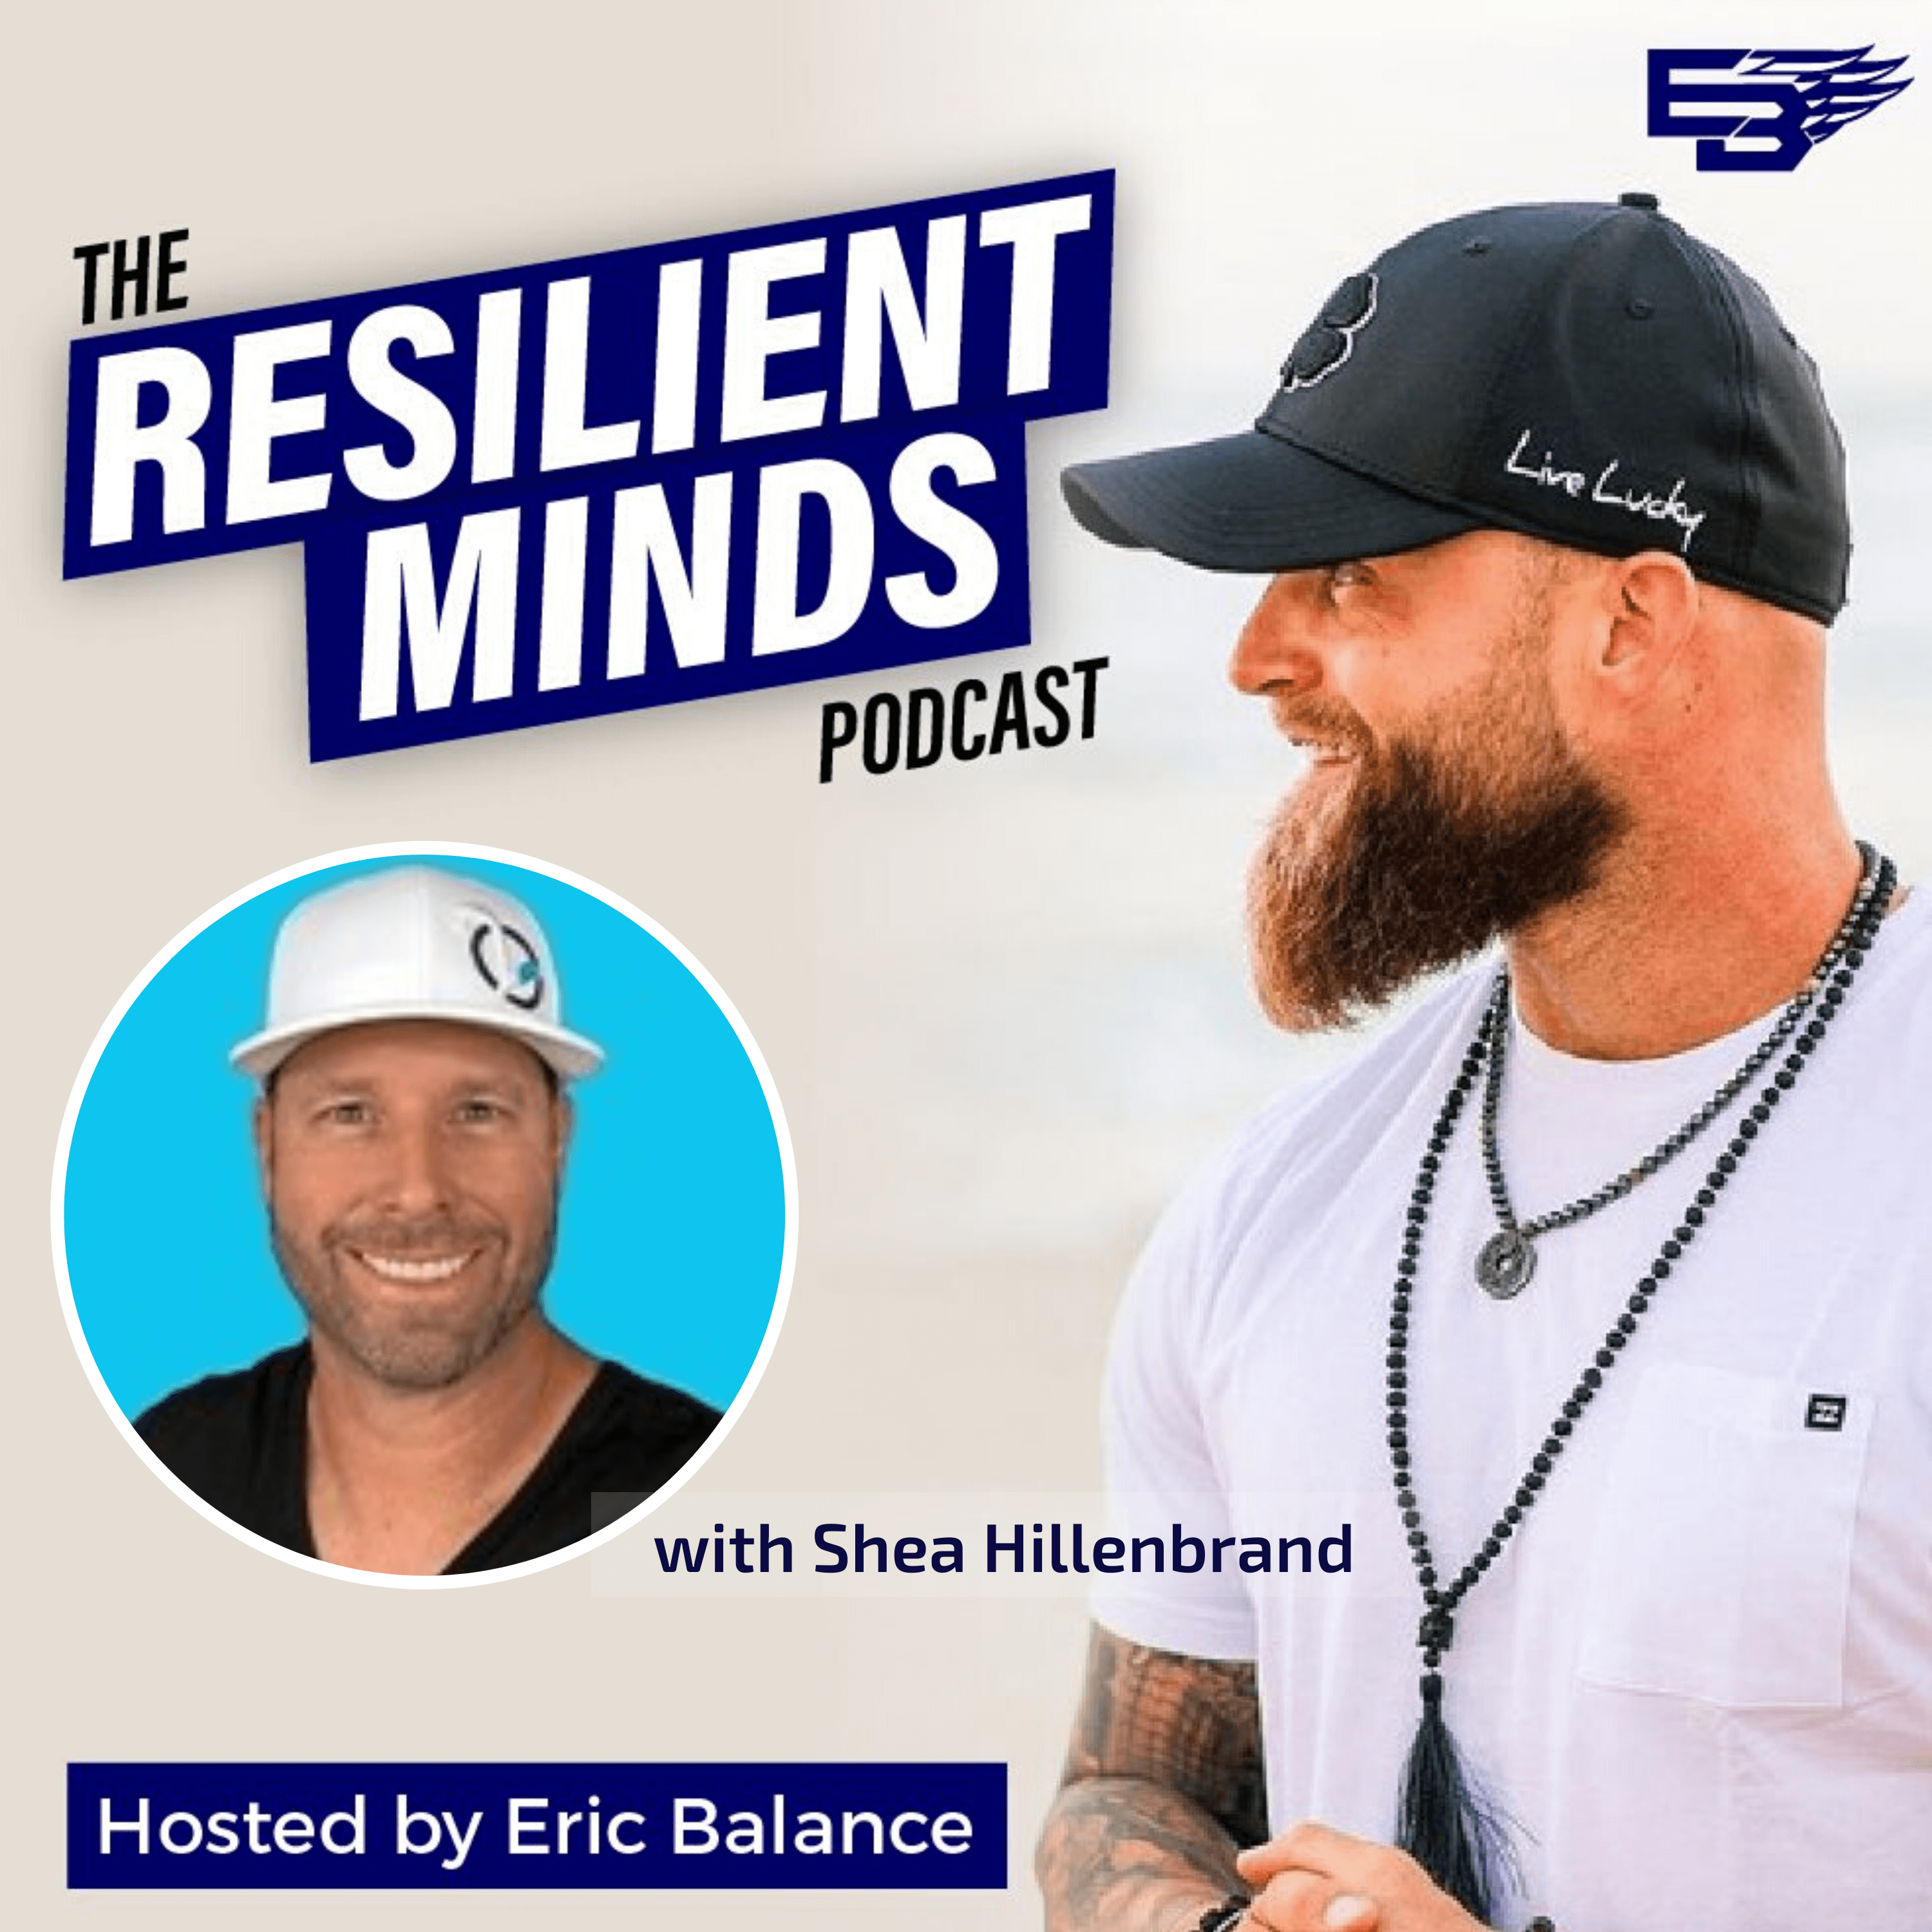 Episode 41 – How Your Past Does Not Have to Equal Your Future with Shea Hillenbrand